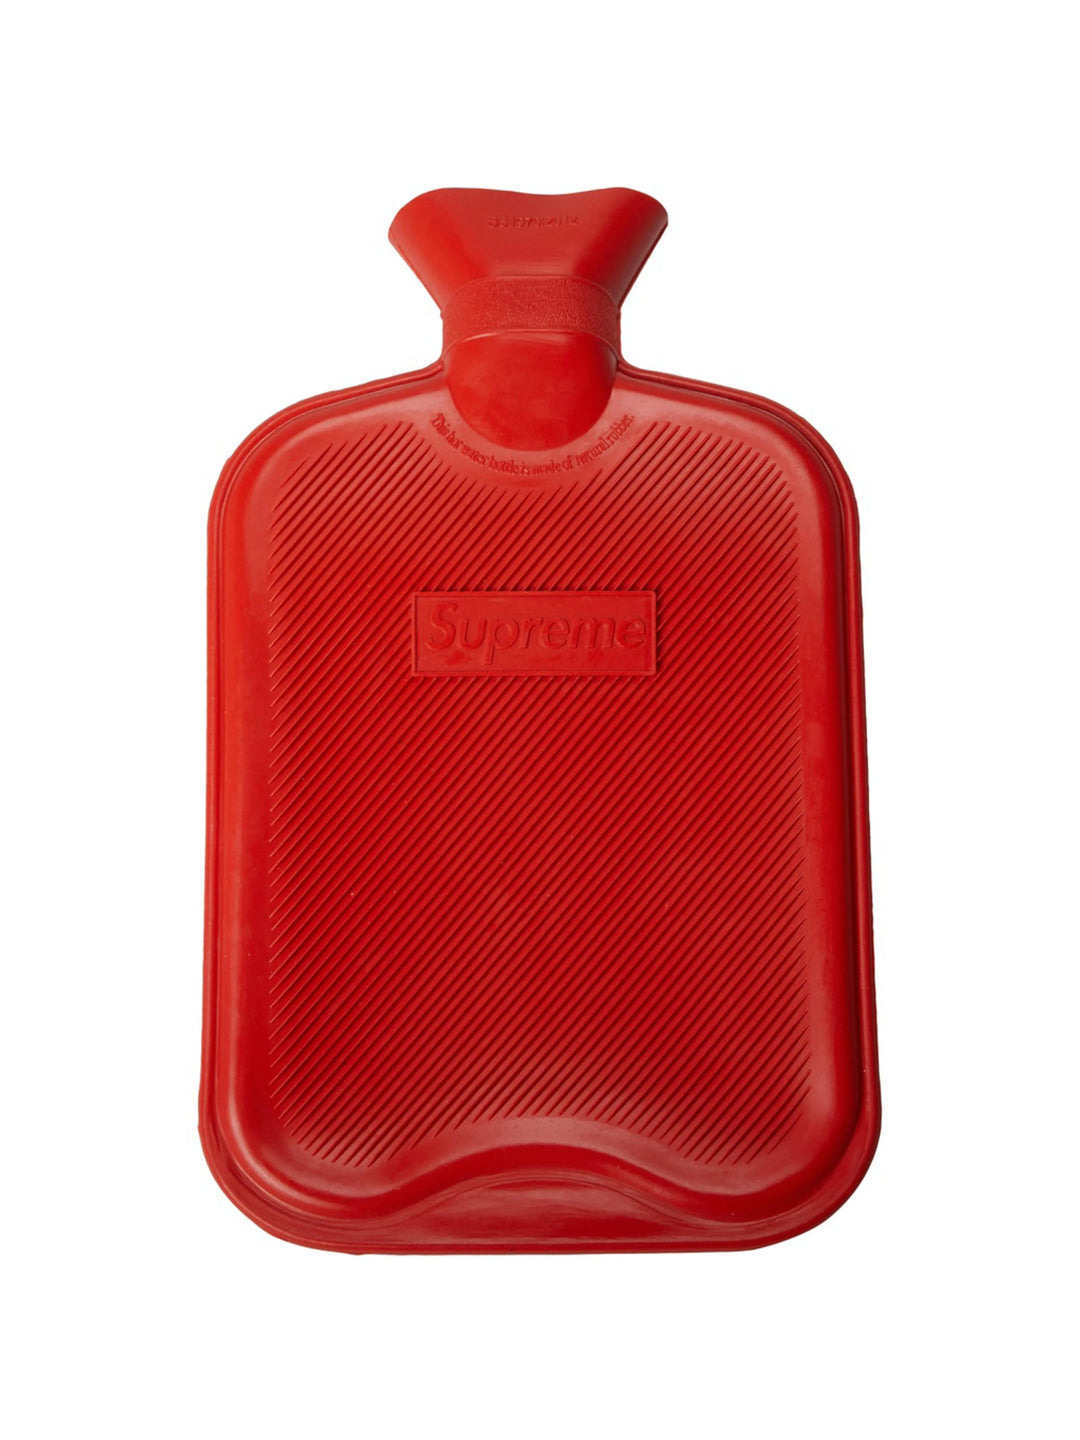 Supreme Hot Water Bottle Red [FW16] Supreme